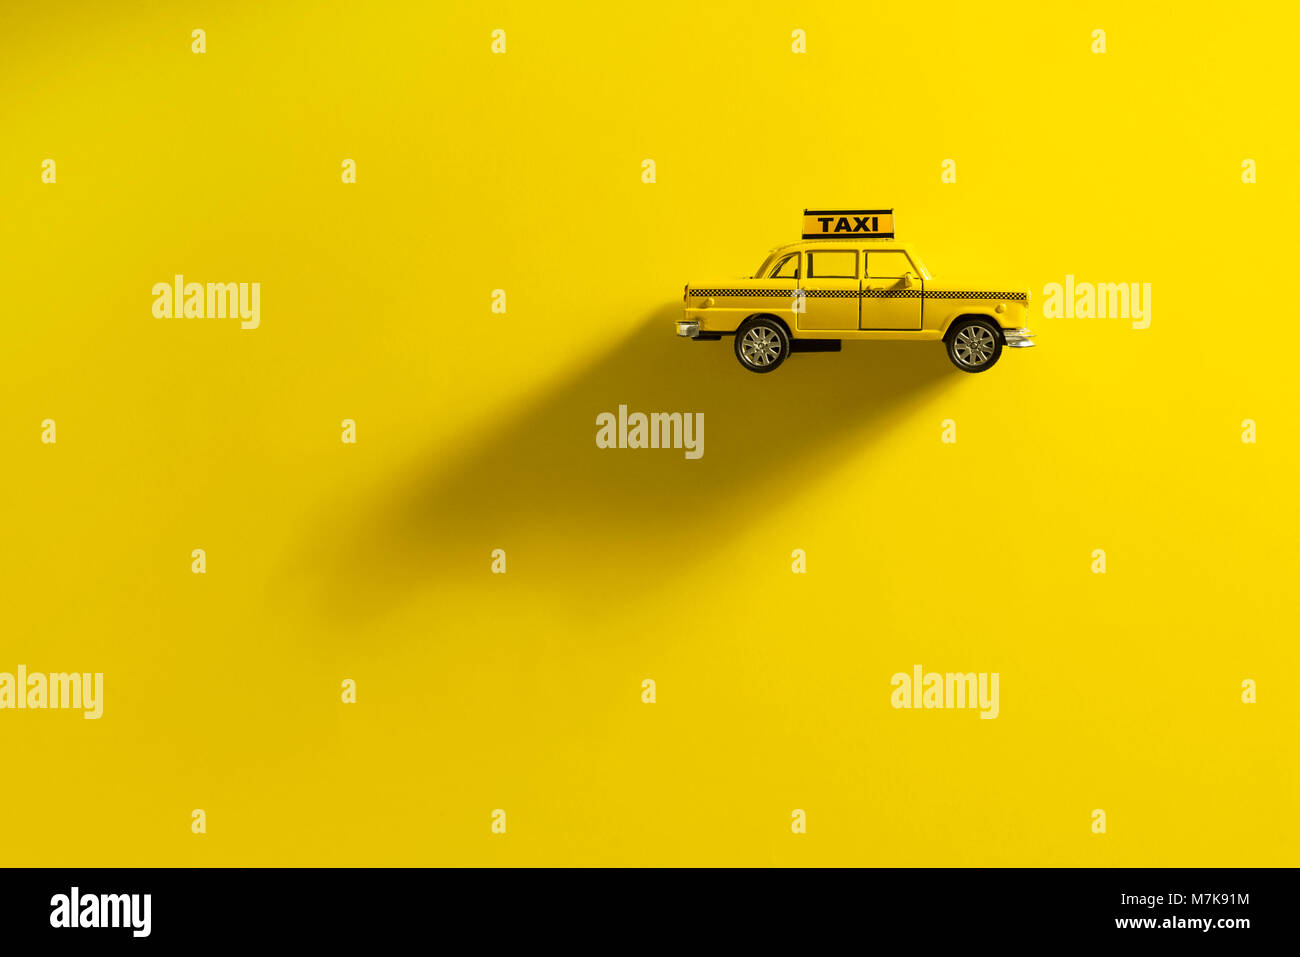 Yellow toy taxi car on a yellow background with a long shadow Stock Photo